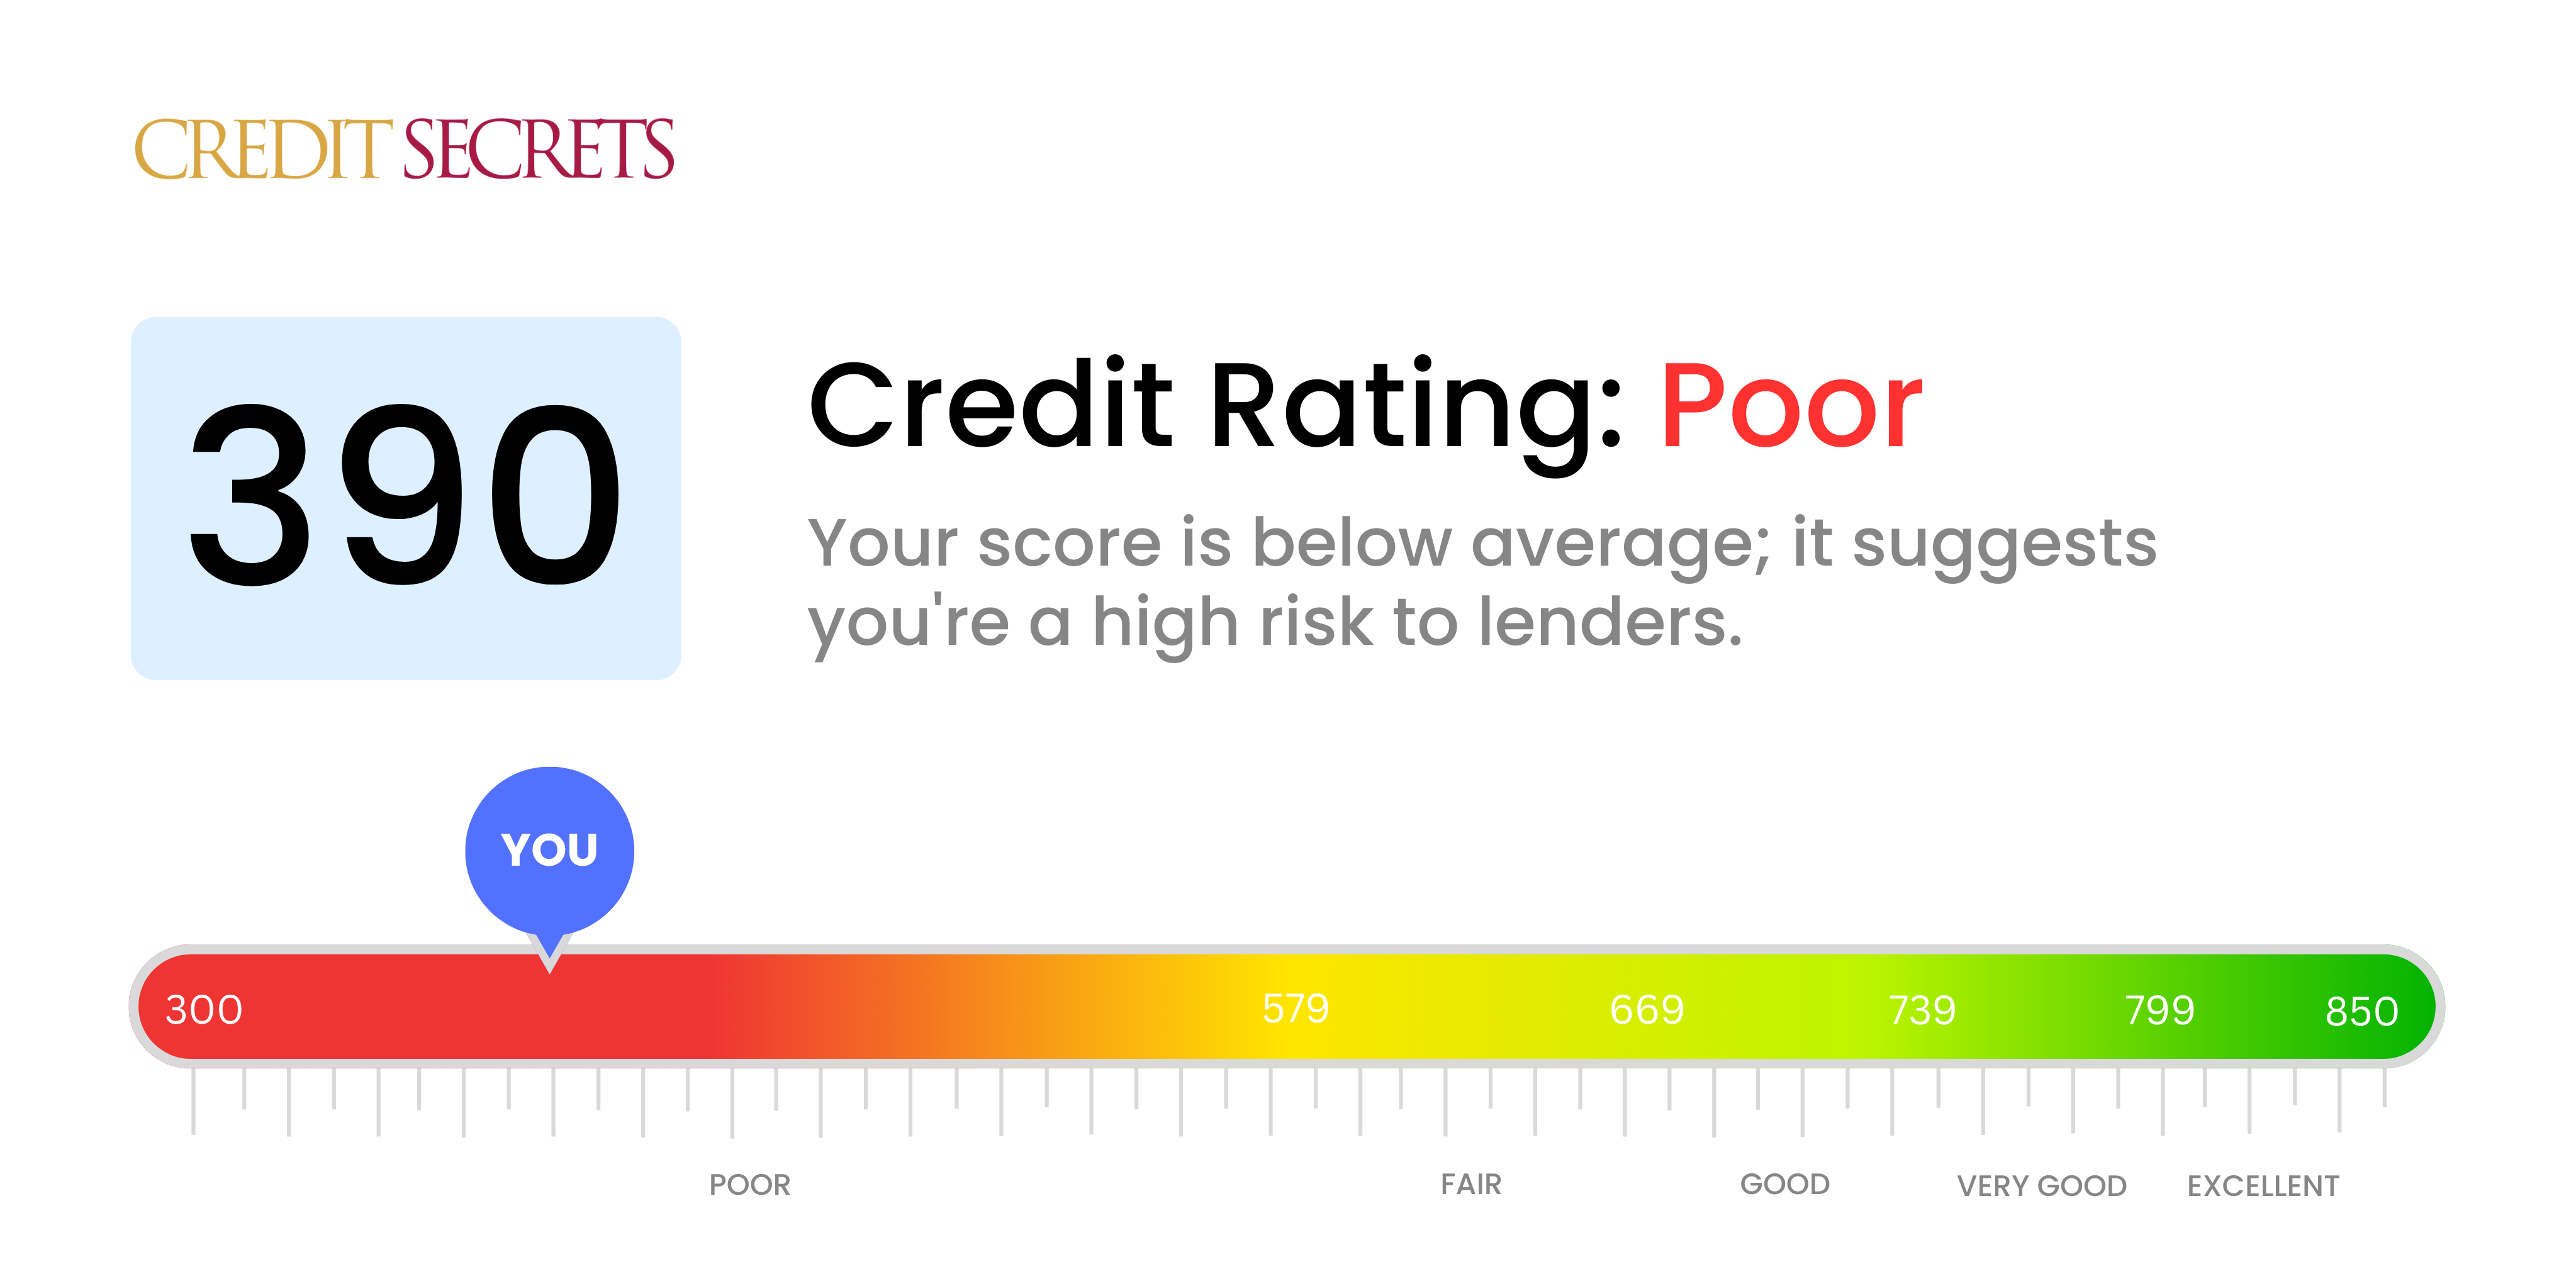 Is 390 a good credit score?